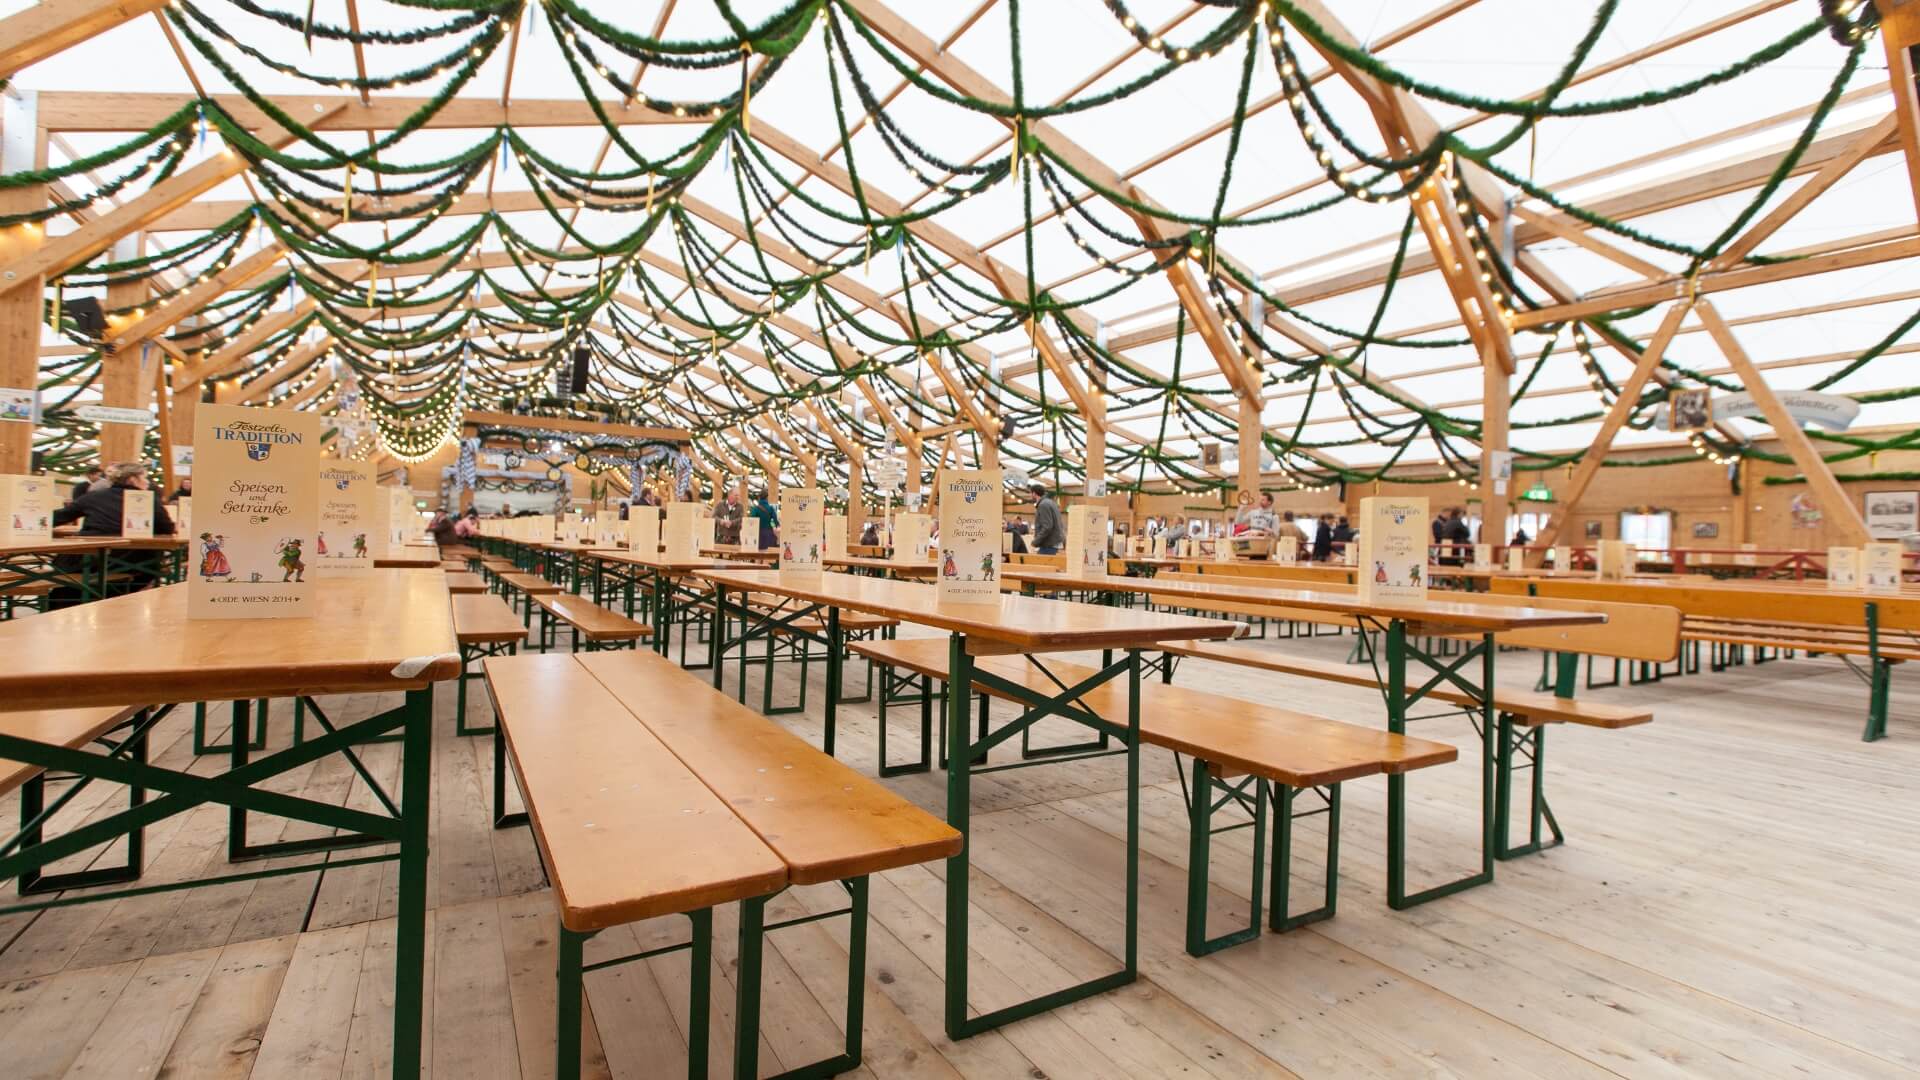 Classic beer garden table sets have been used at the Oktoberfest.